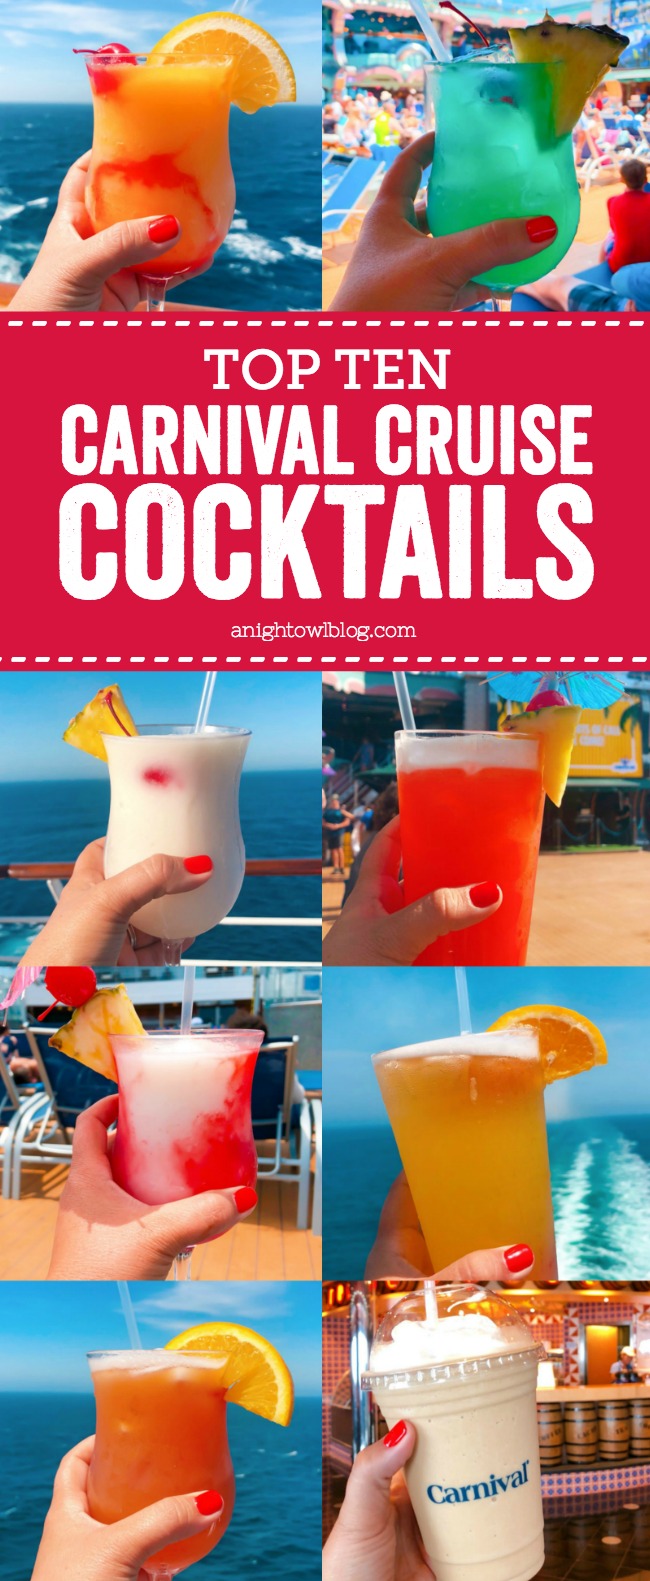 From The Fun Ship to a Kiss on the Lips, check out the Top Ten Carnival Cruise Drinks to Order on your next Carnival Cruise! #CruisingCarnival